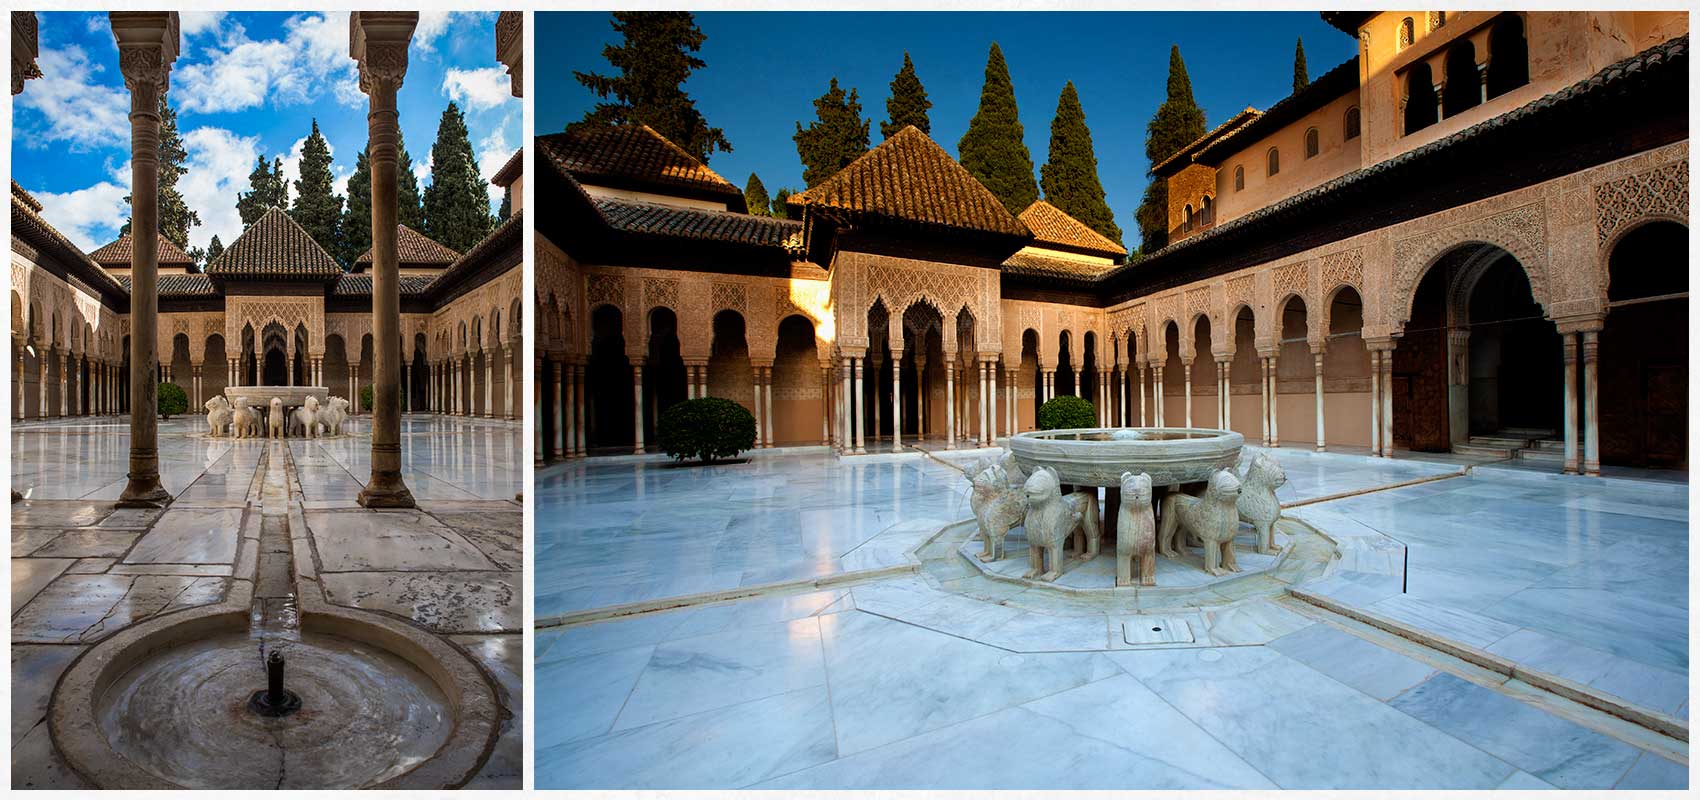 Entry and guided visit to La Alhambra